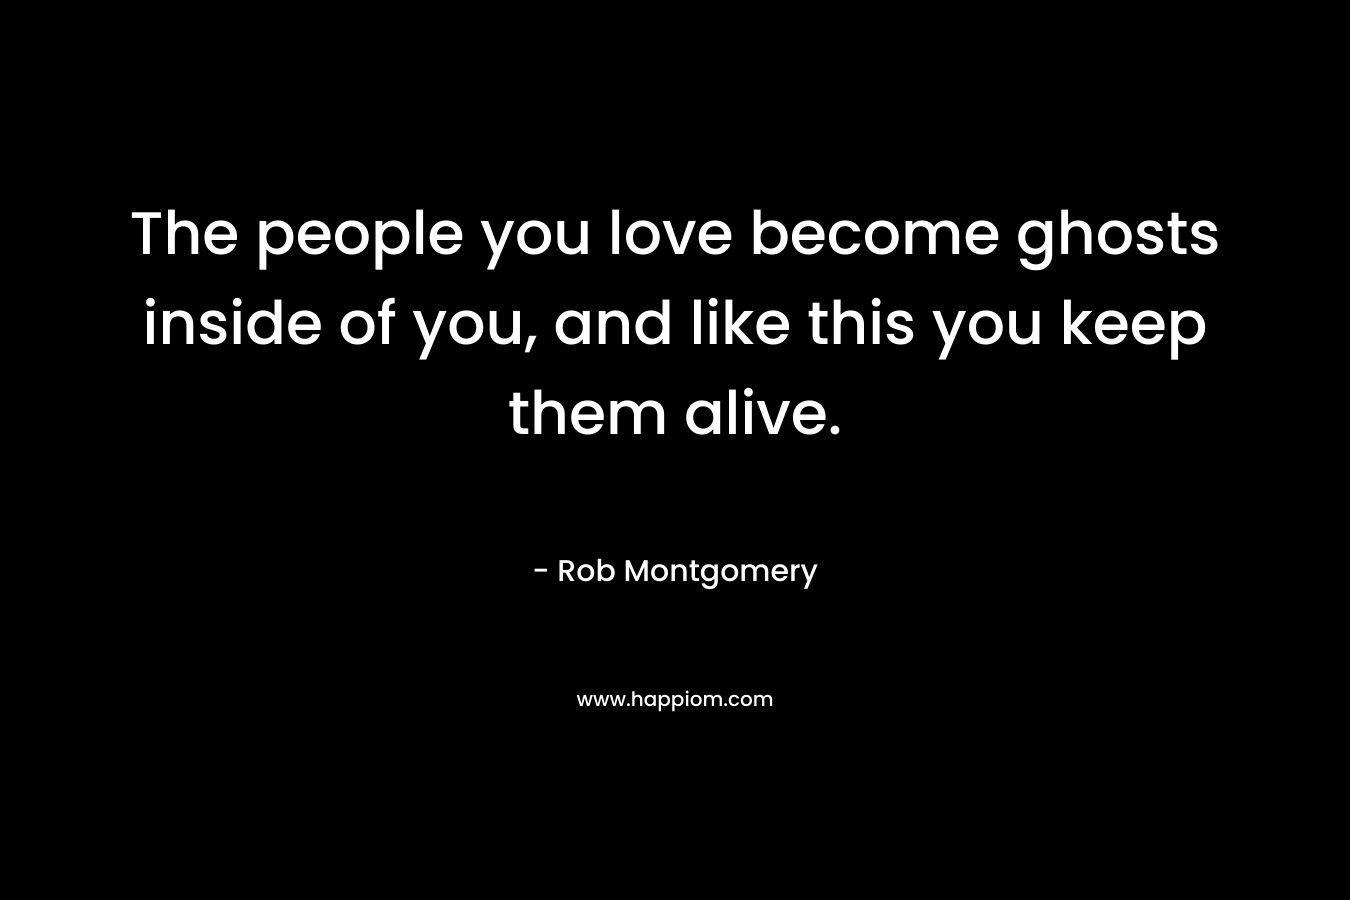 The people you love become ghosts inside of you, and like this you keep them alive.